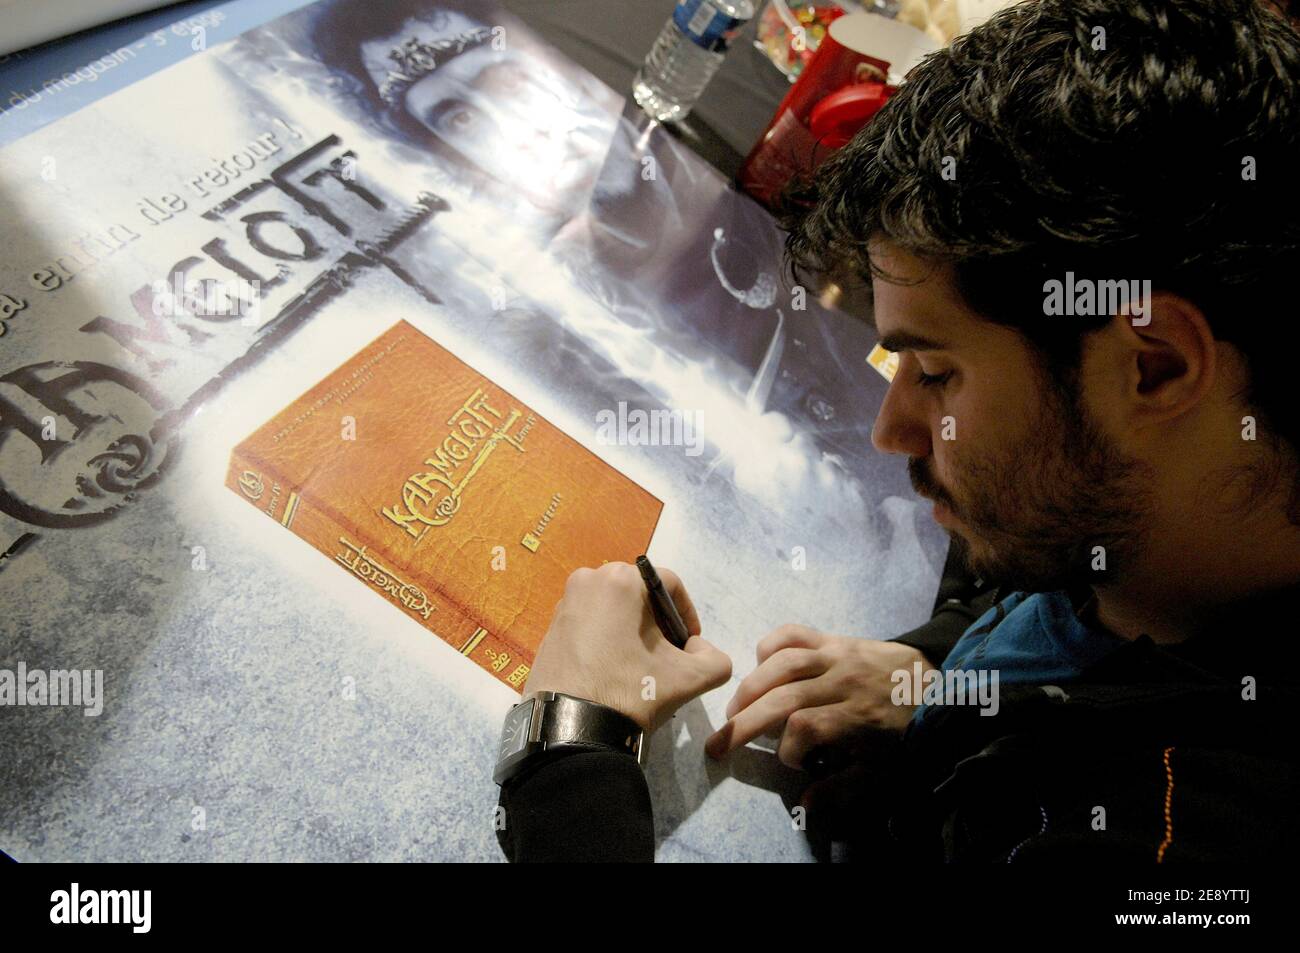 Simon Astier from French TV channel M6 serie, Kaamelott during a DVD  signing at Saint-Lazare FNAC store in Paris, France on October 19, 2007.  Photo by Giancarlo Gorassini/ABACAPRESS.COM Stock Photo - Alamy